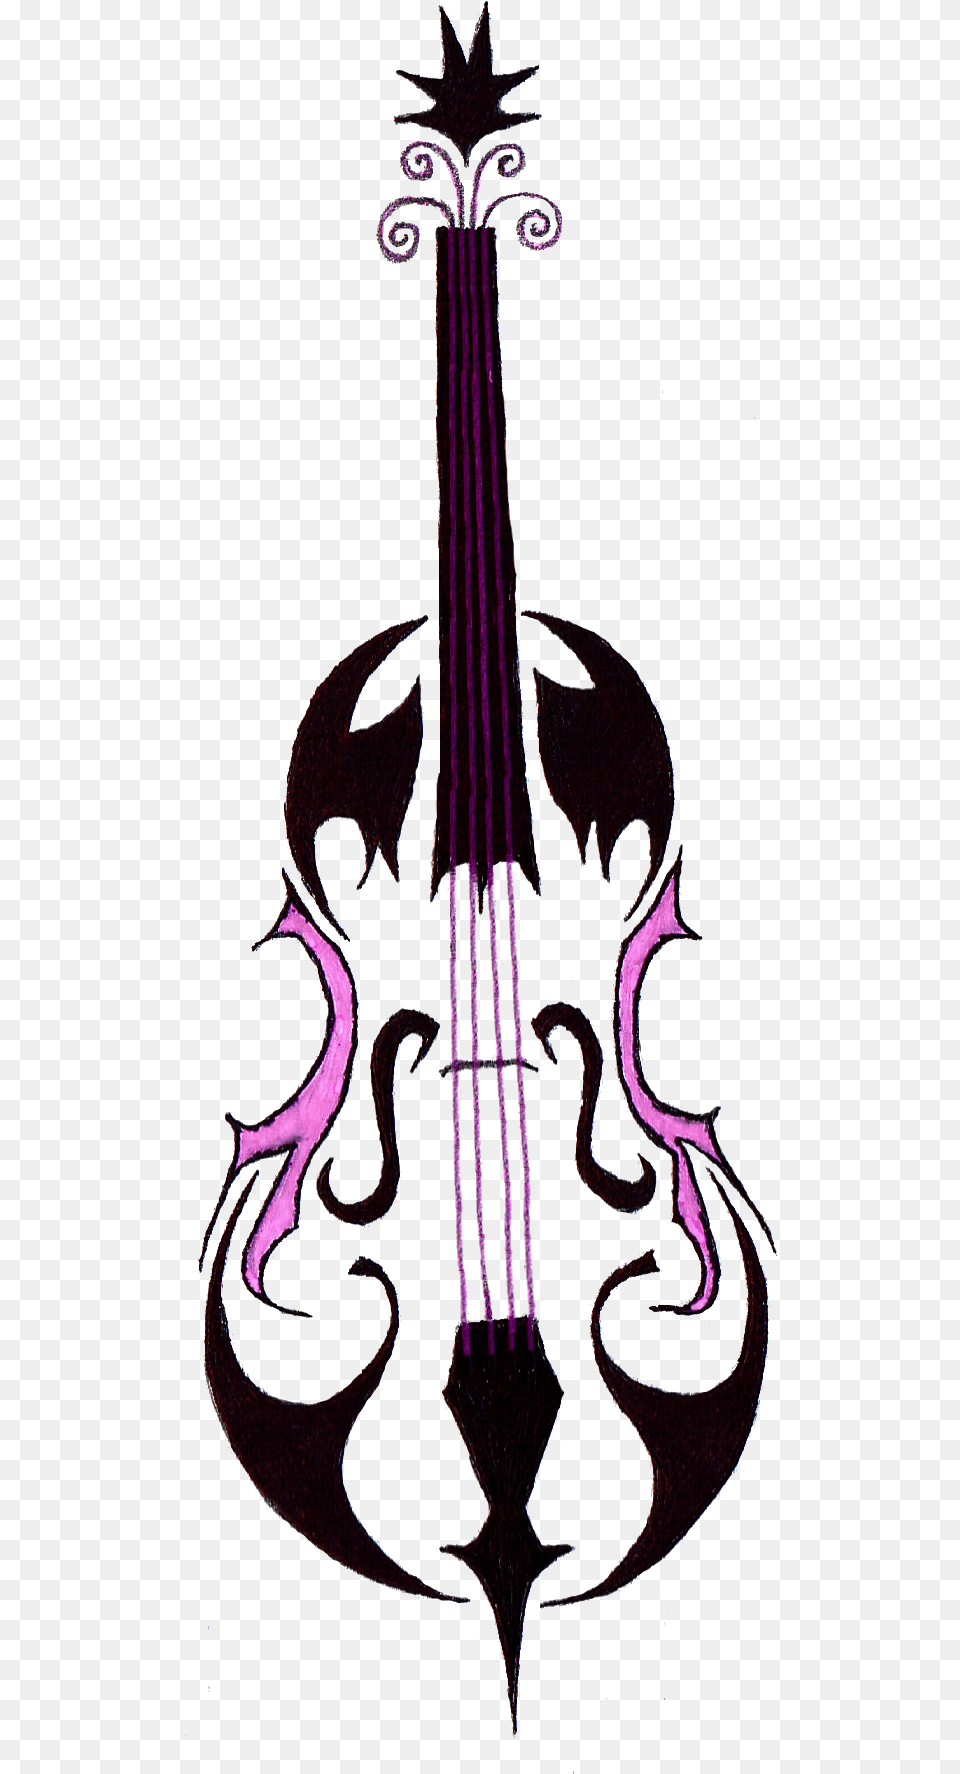 Fiddle Drawing Tribal Clipart Tribal Cello Tattoo, Musical Instrument Free Transparent Png